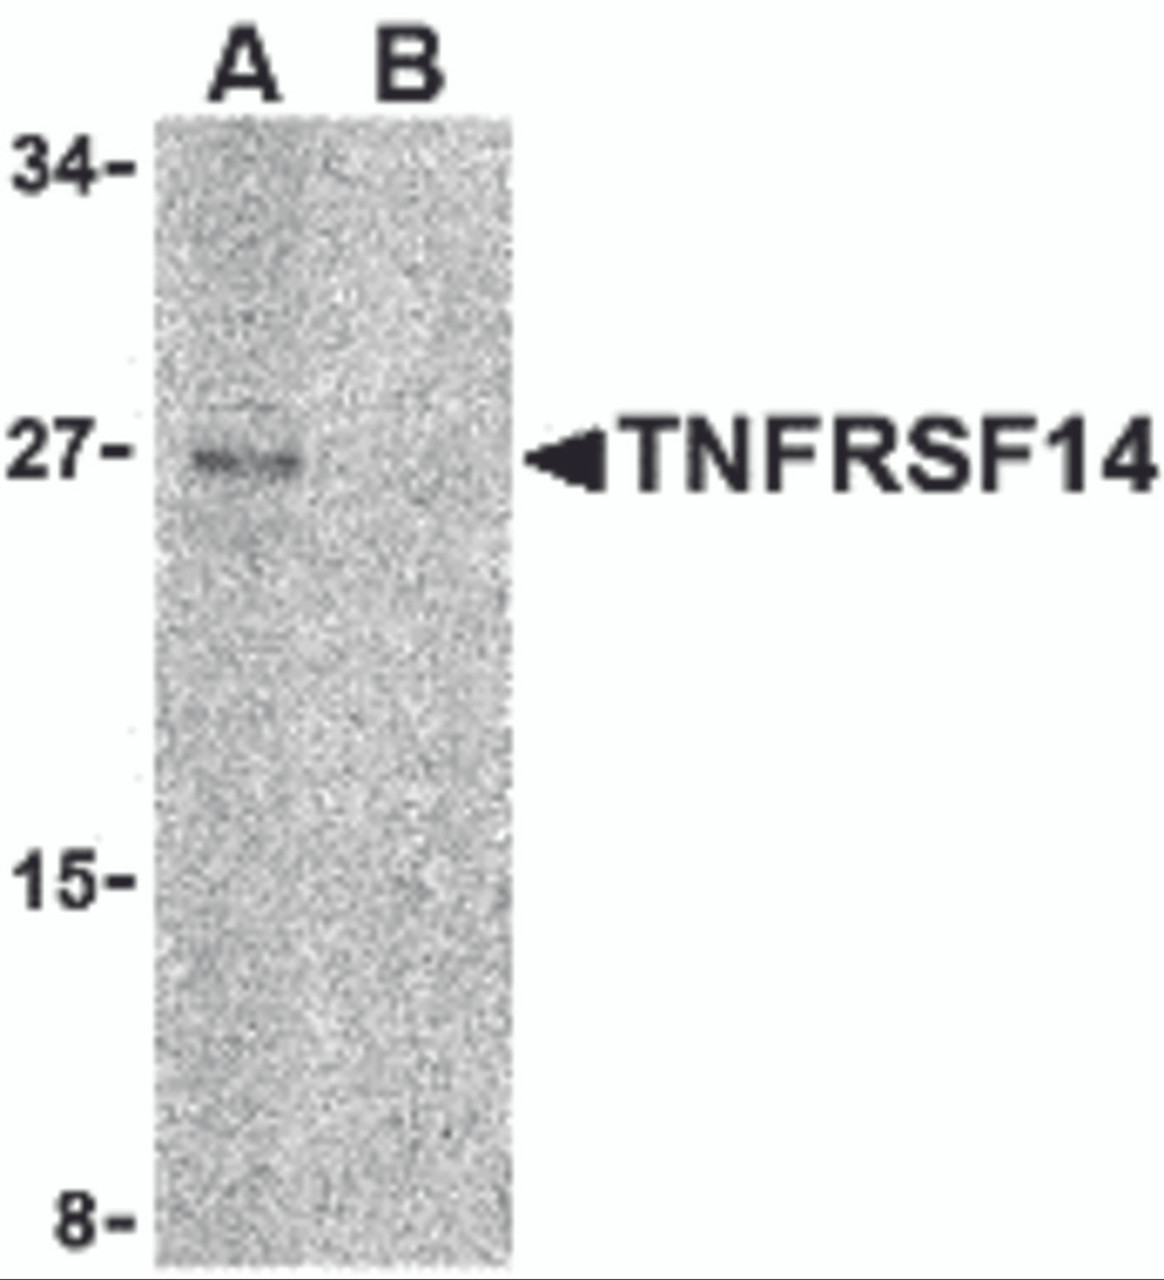 Western blot analysis of TNFRSF14 in Raji cell lysate with TNFRSF14 antibody at 2 &#956;g/mL in (A) the absence and (B) the presence of blocking peptide.